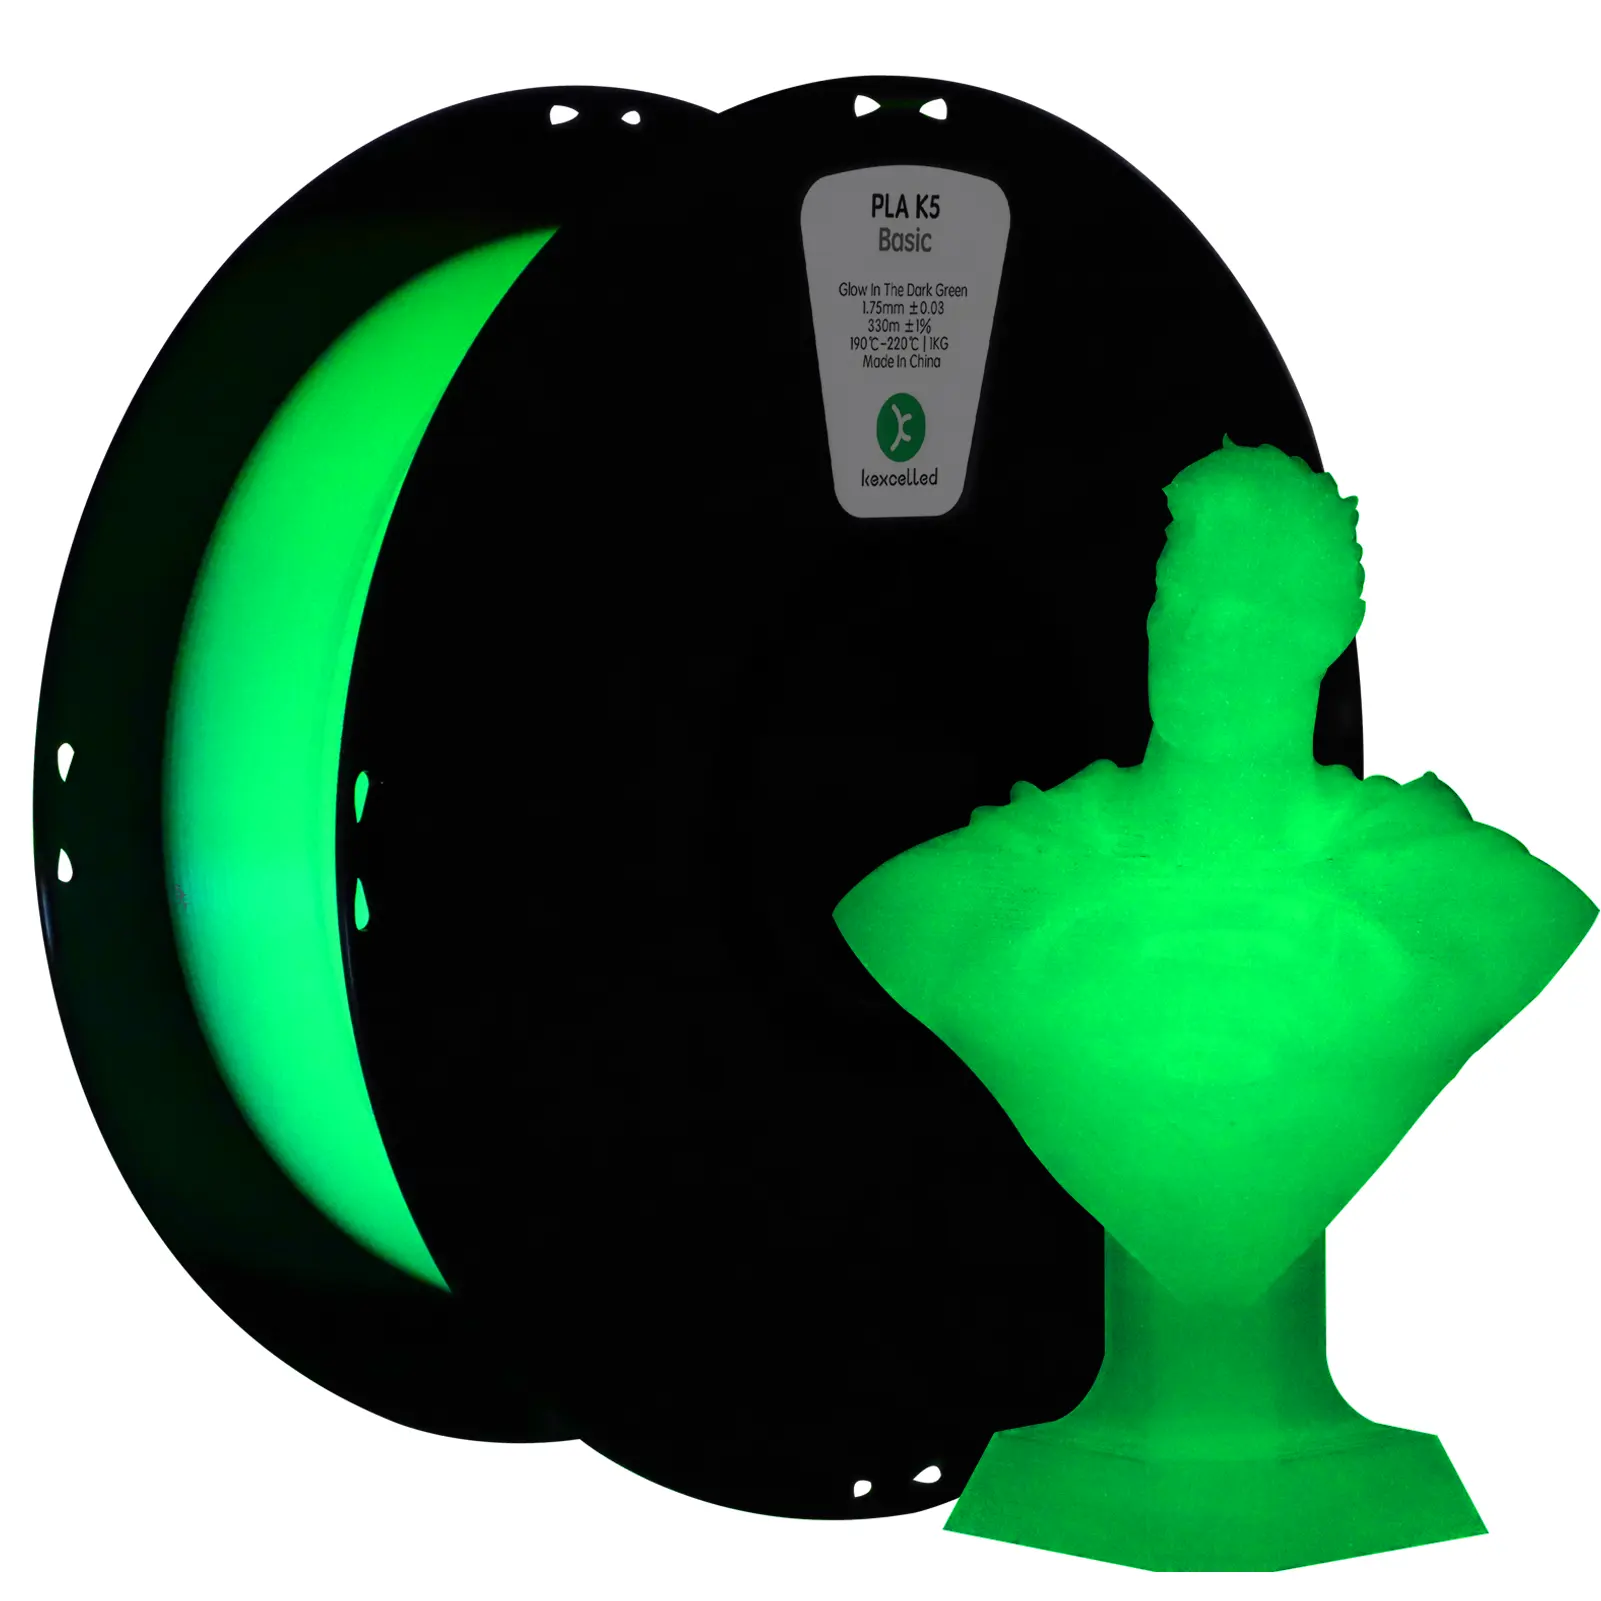 Kexcelled Manufacturer 3D Pla 1Kg 1.75 Glow Pla 3D Printer Filament With Glow In The Dark Green Or Fluorescent